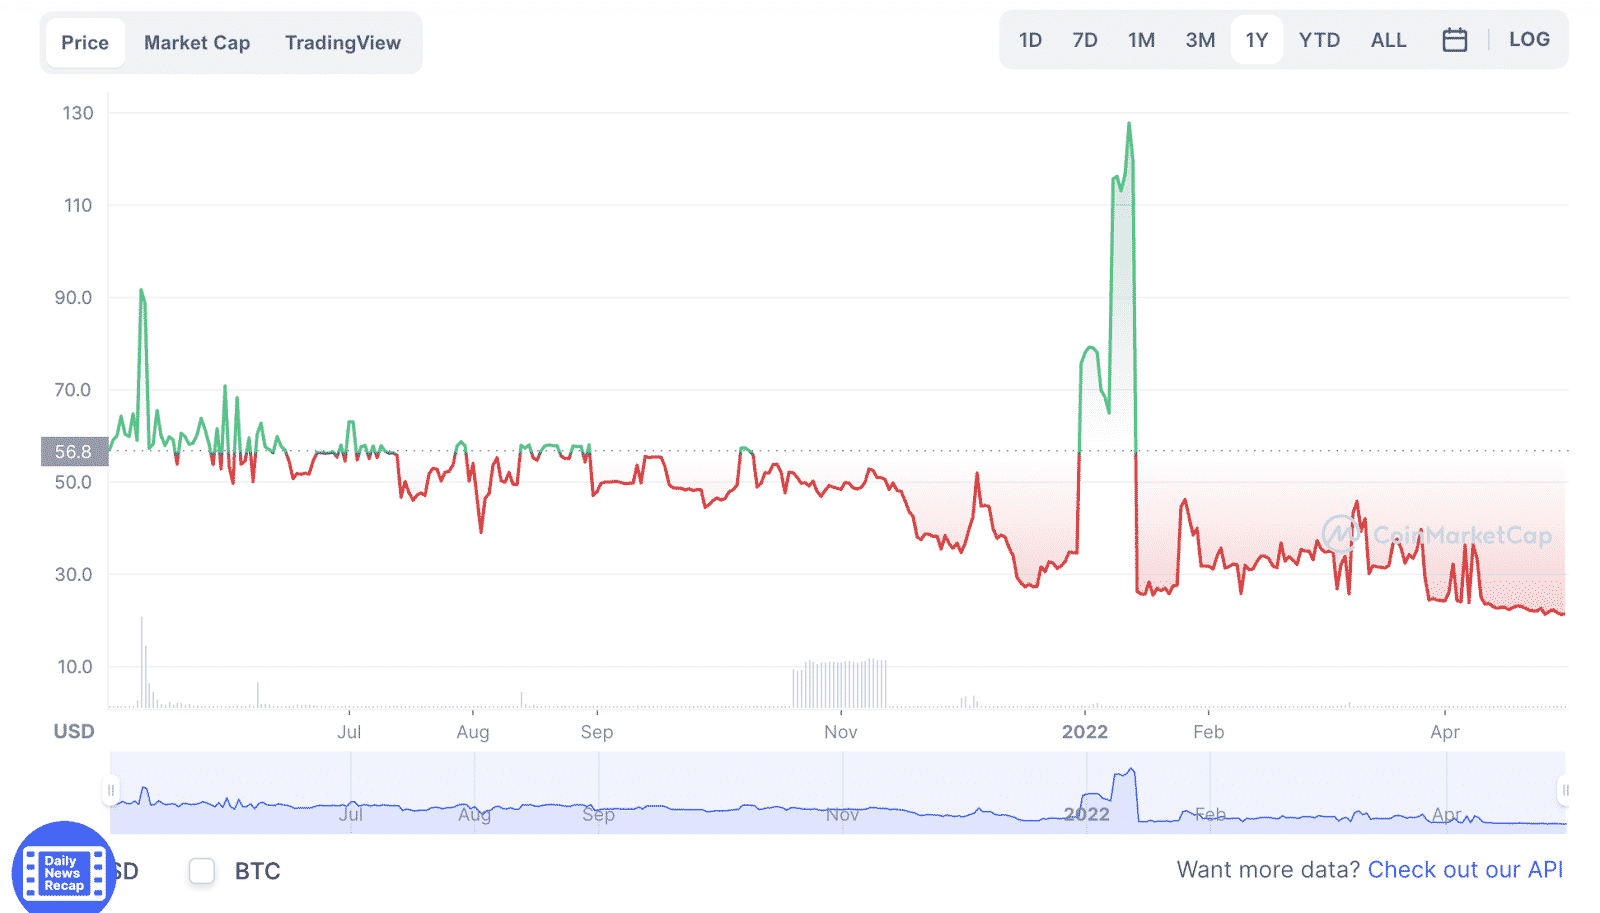 DGX/USD price chart for 1Y